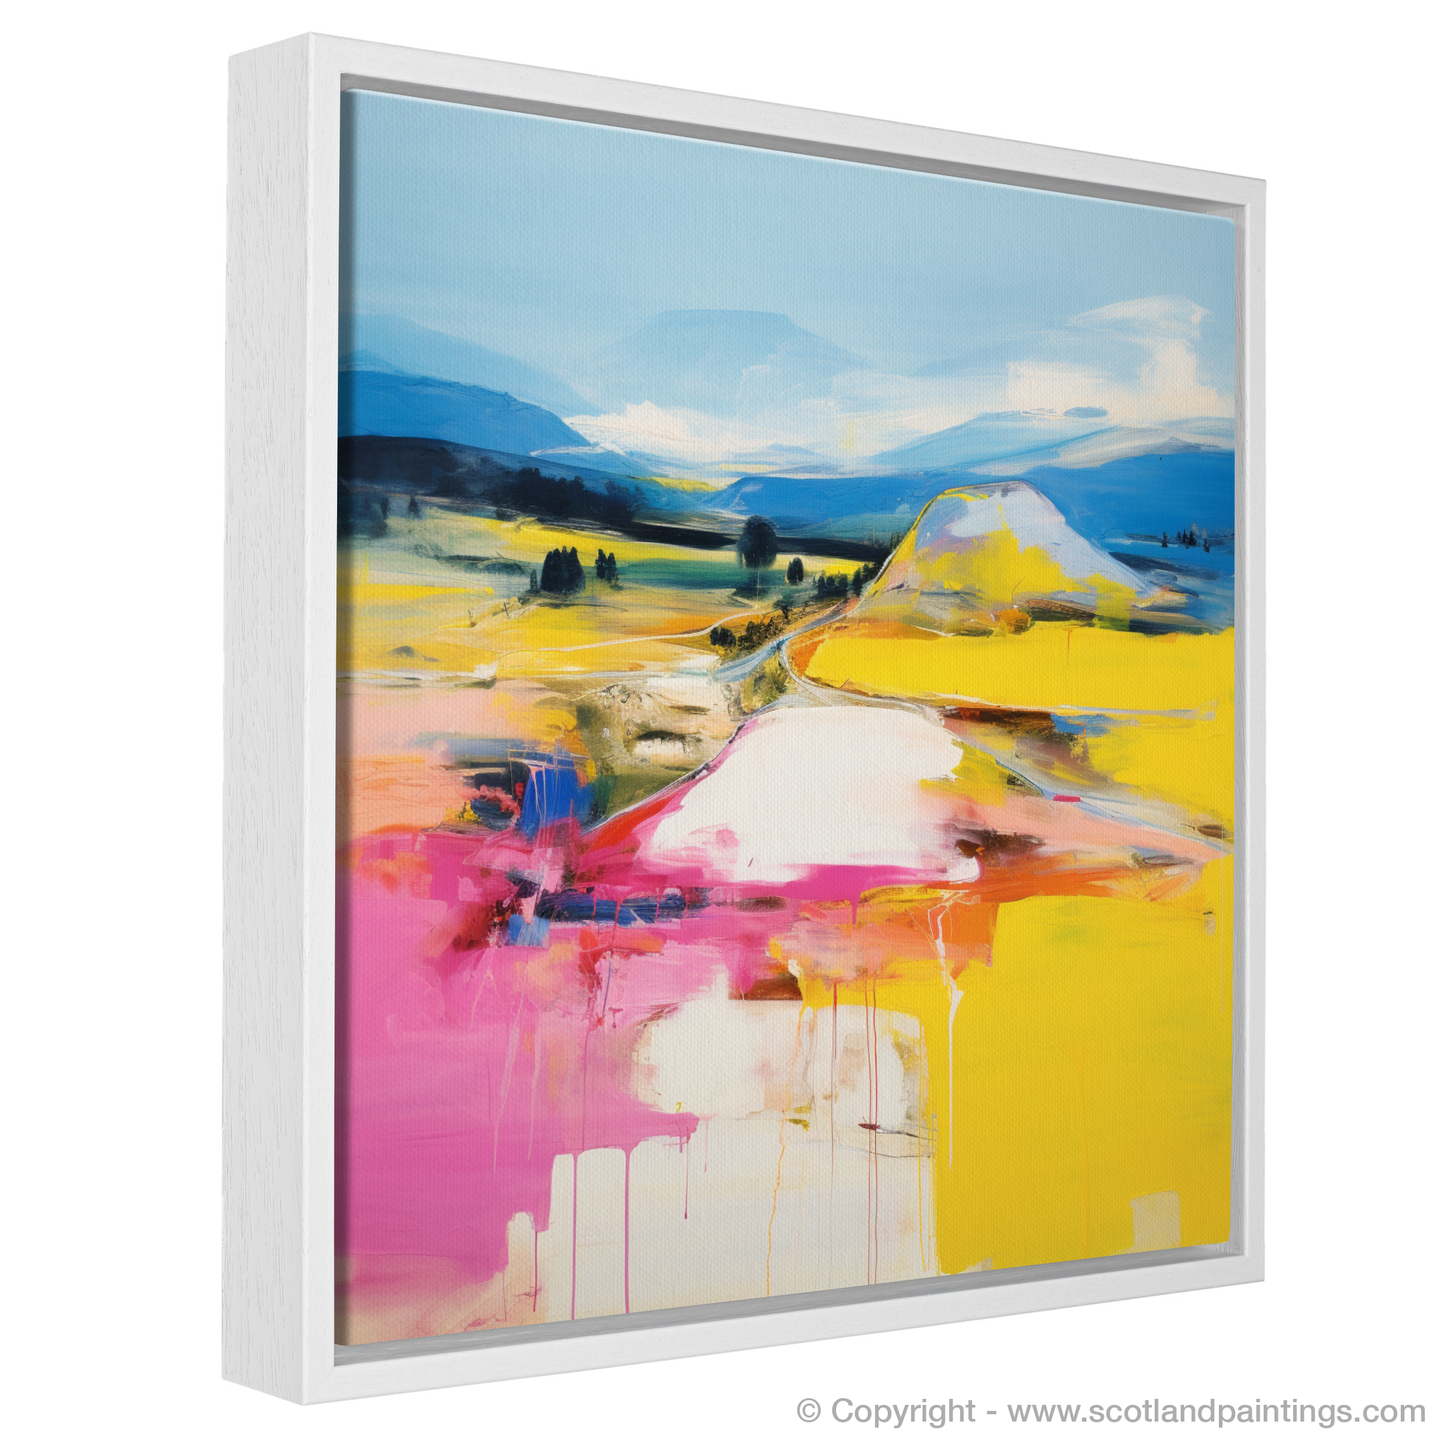 Painting and Art Print of Glenlivet, Moray in summer entitled "Summer Vibrance of Glenlivet Moray".